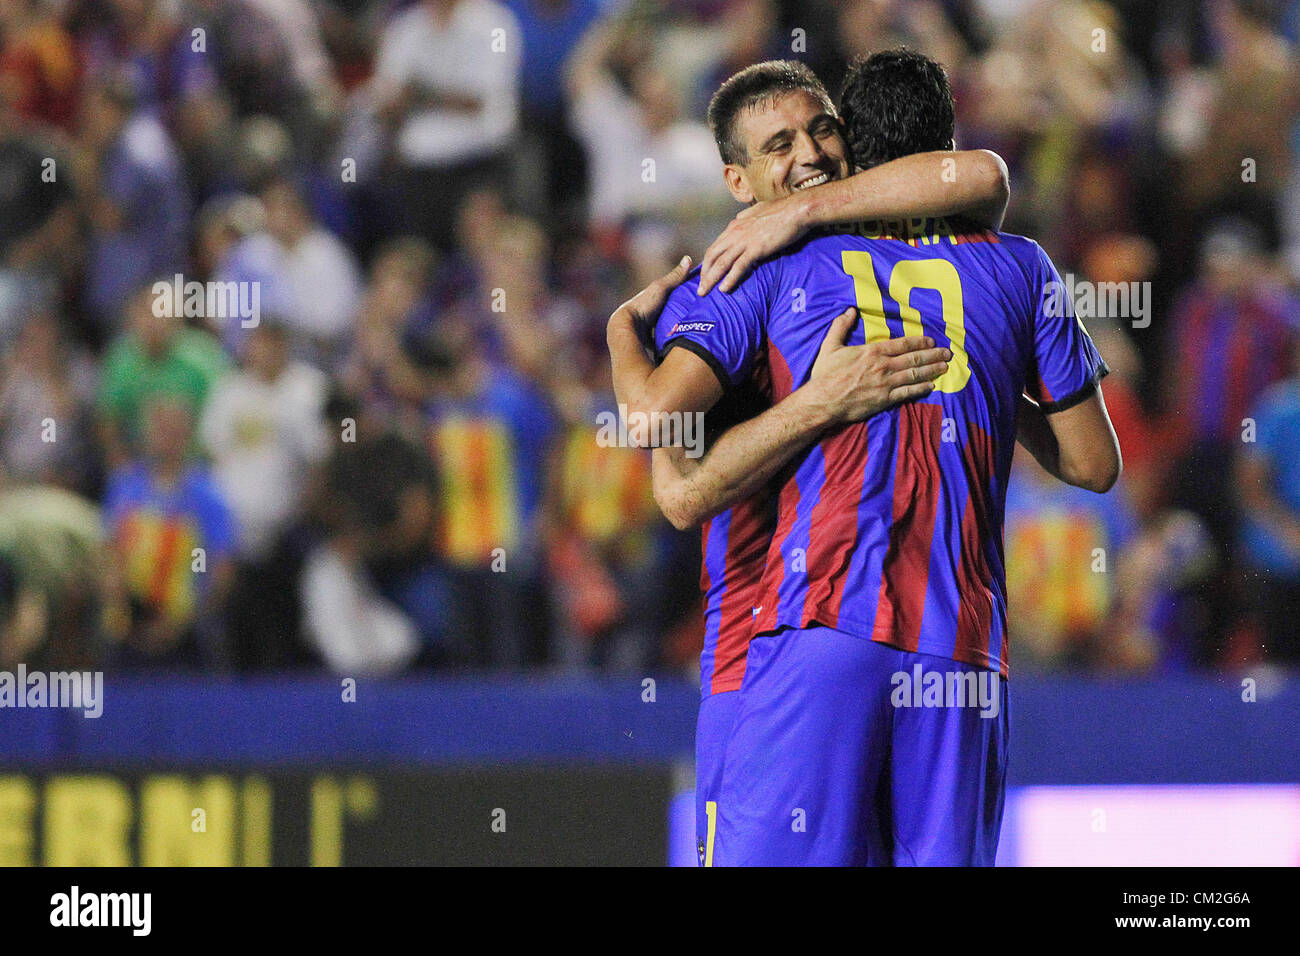 20/09/2012 - Europa League Football Europe, Group Matchday 1, Levante UD vs. Helsingborg - Ballesteros from LEvante UD (left) (c), celebrates victory with Iborra (right) at the end of the game Stock Photo